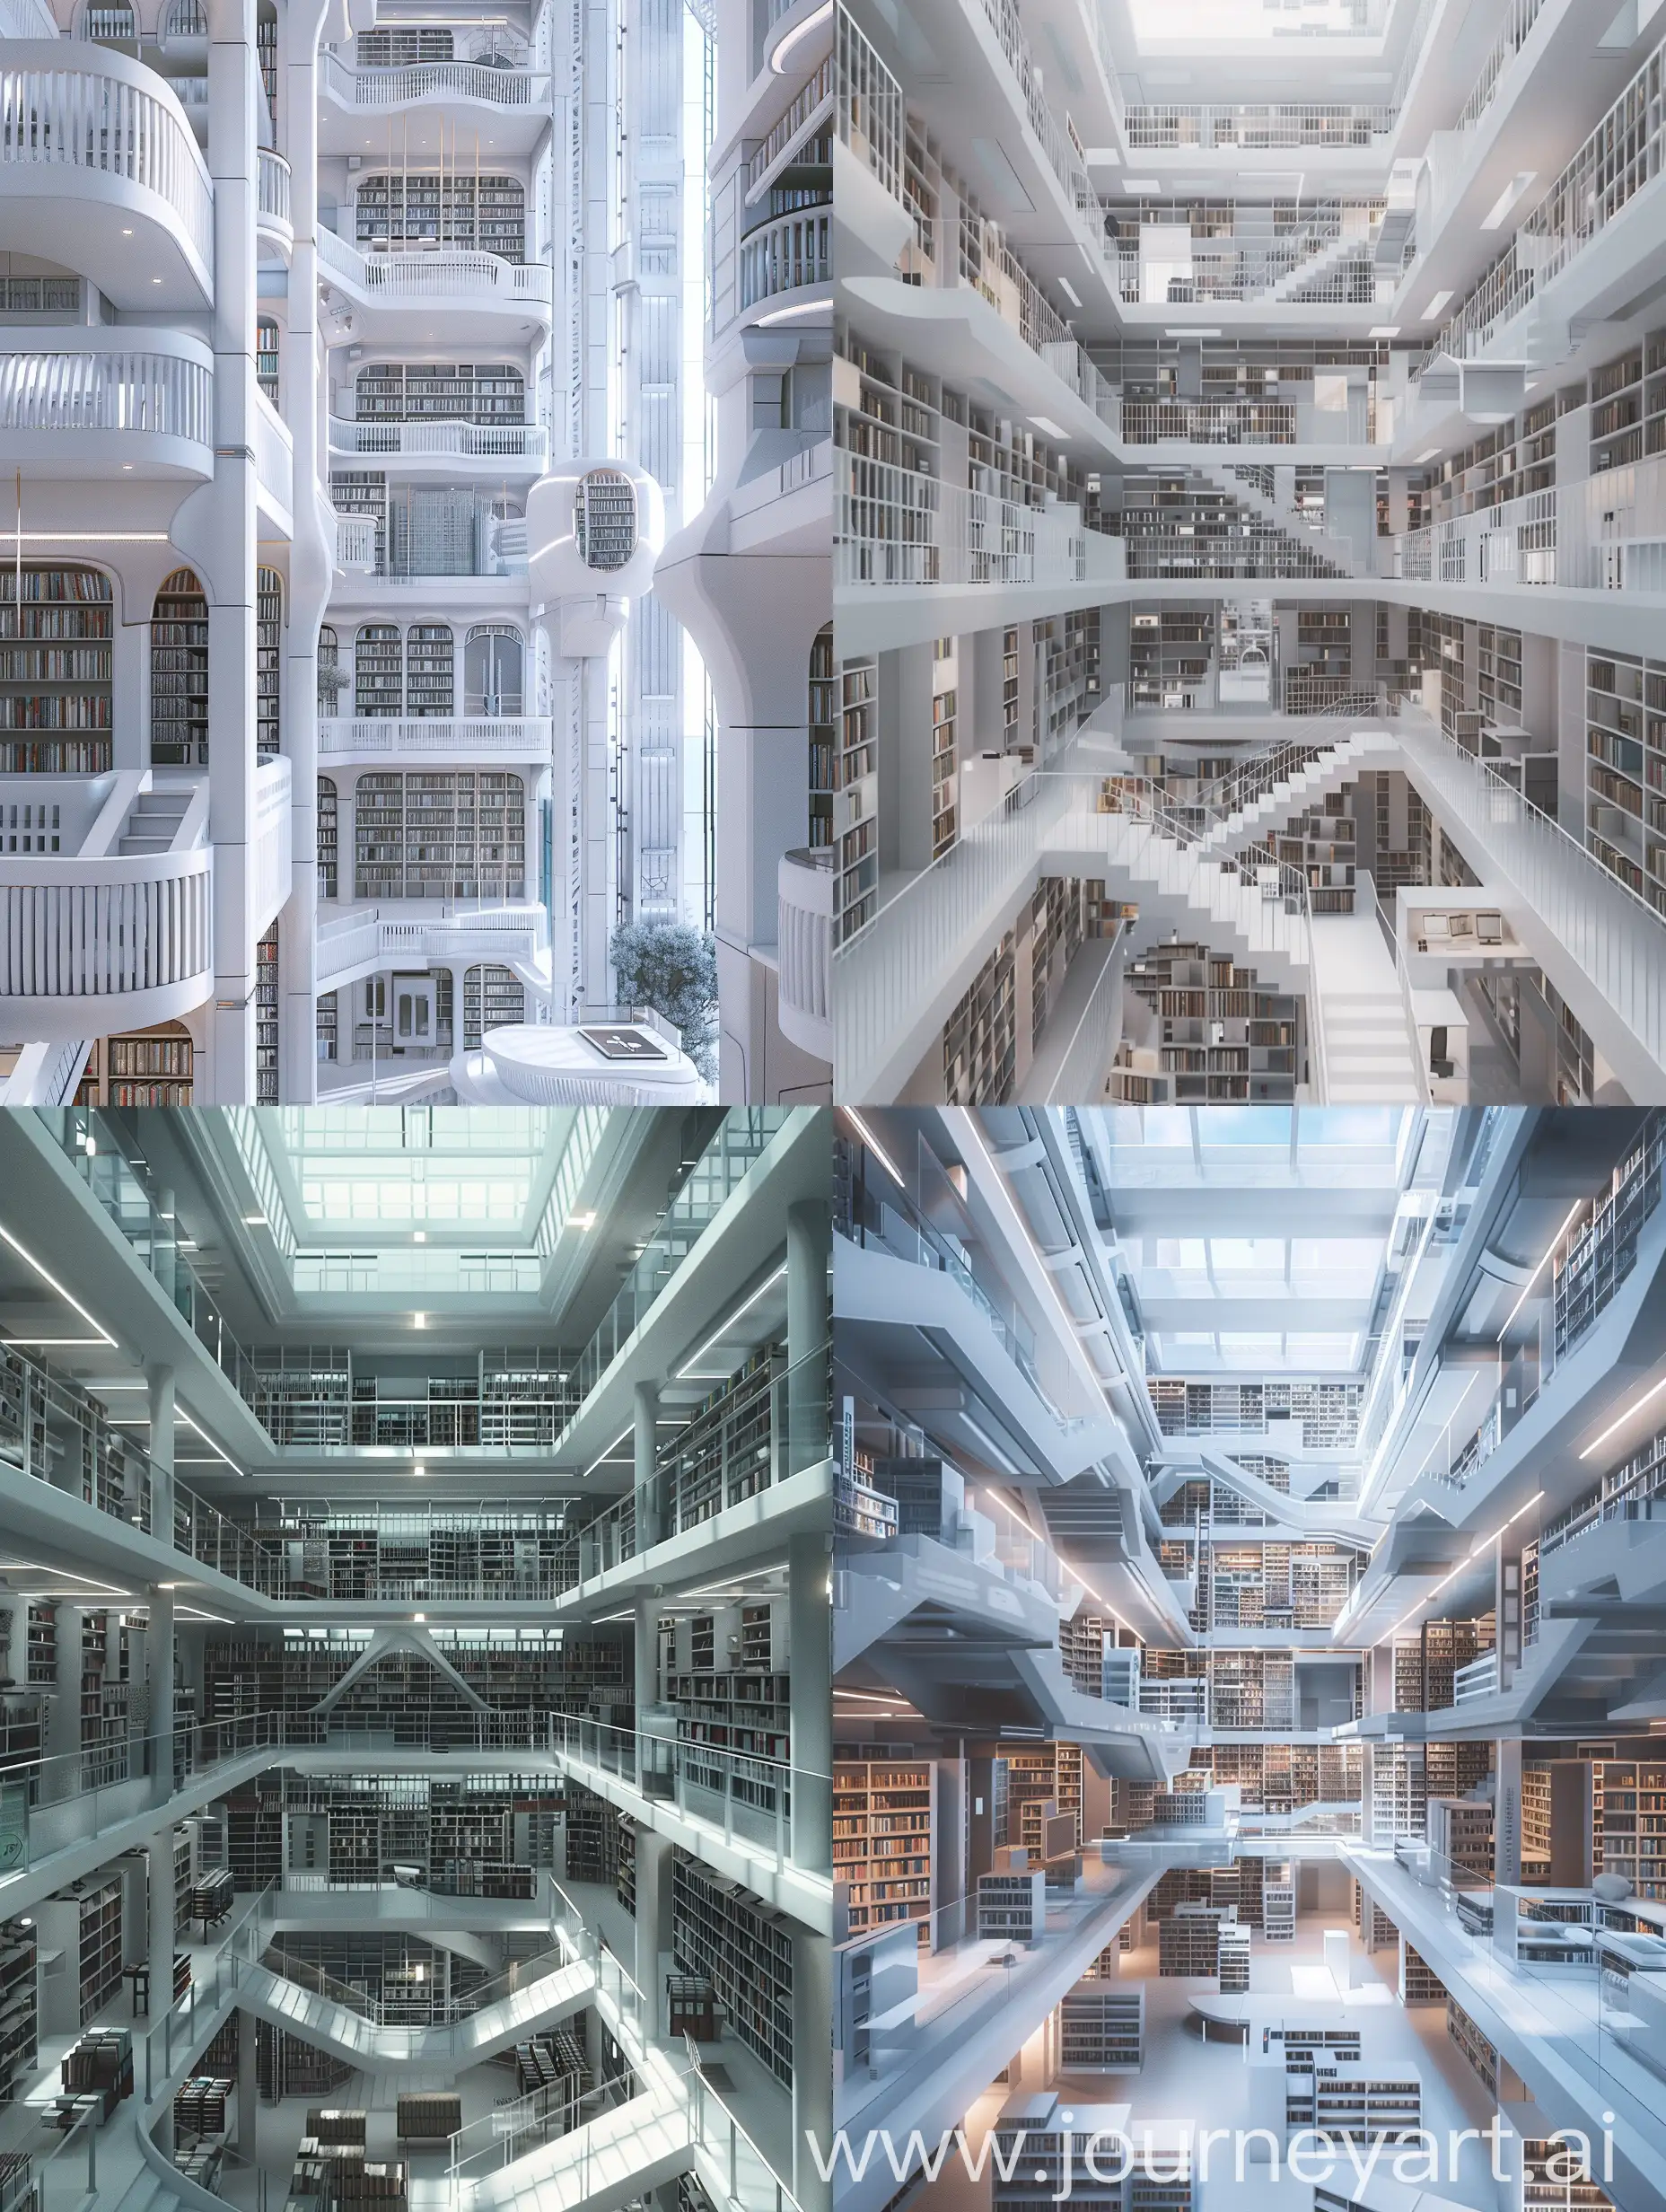 mix of a library building with five floors and stacks of books. main colors are white and grey. hi-tech style. 4k visualization at eye level.